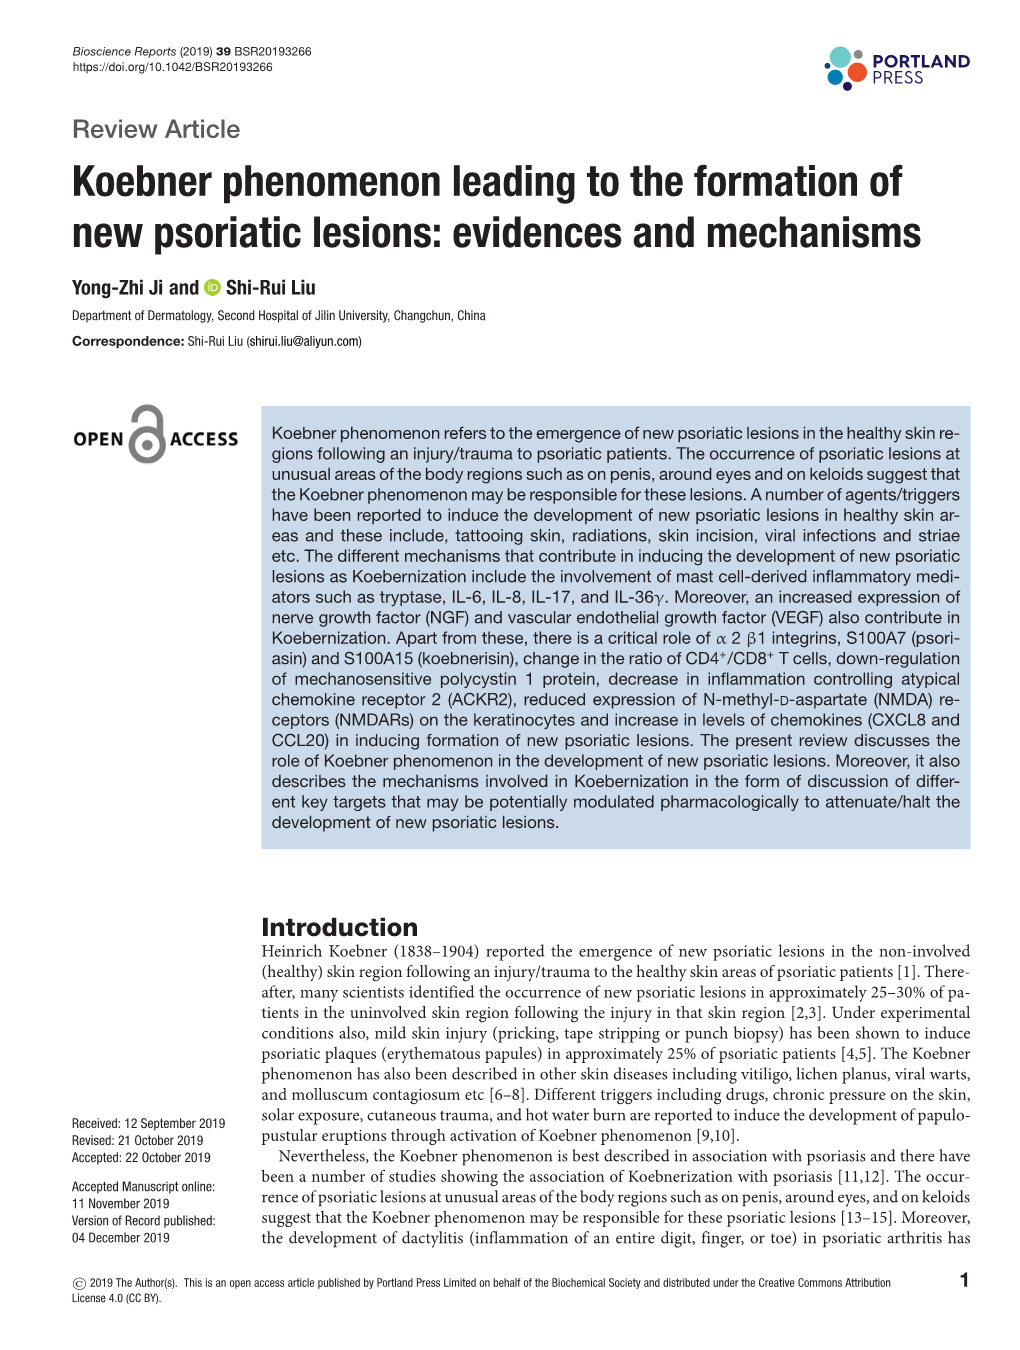 Koebner Phenomenon Leading to the Formation of New Psoriatic Lesions: Evidences and Mechanisms